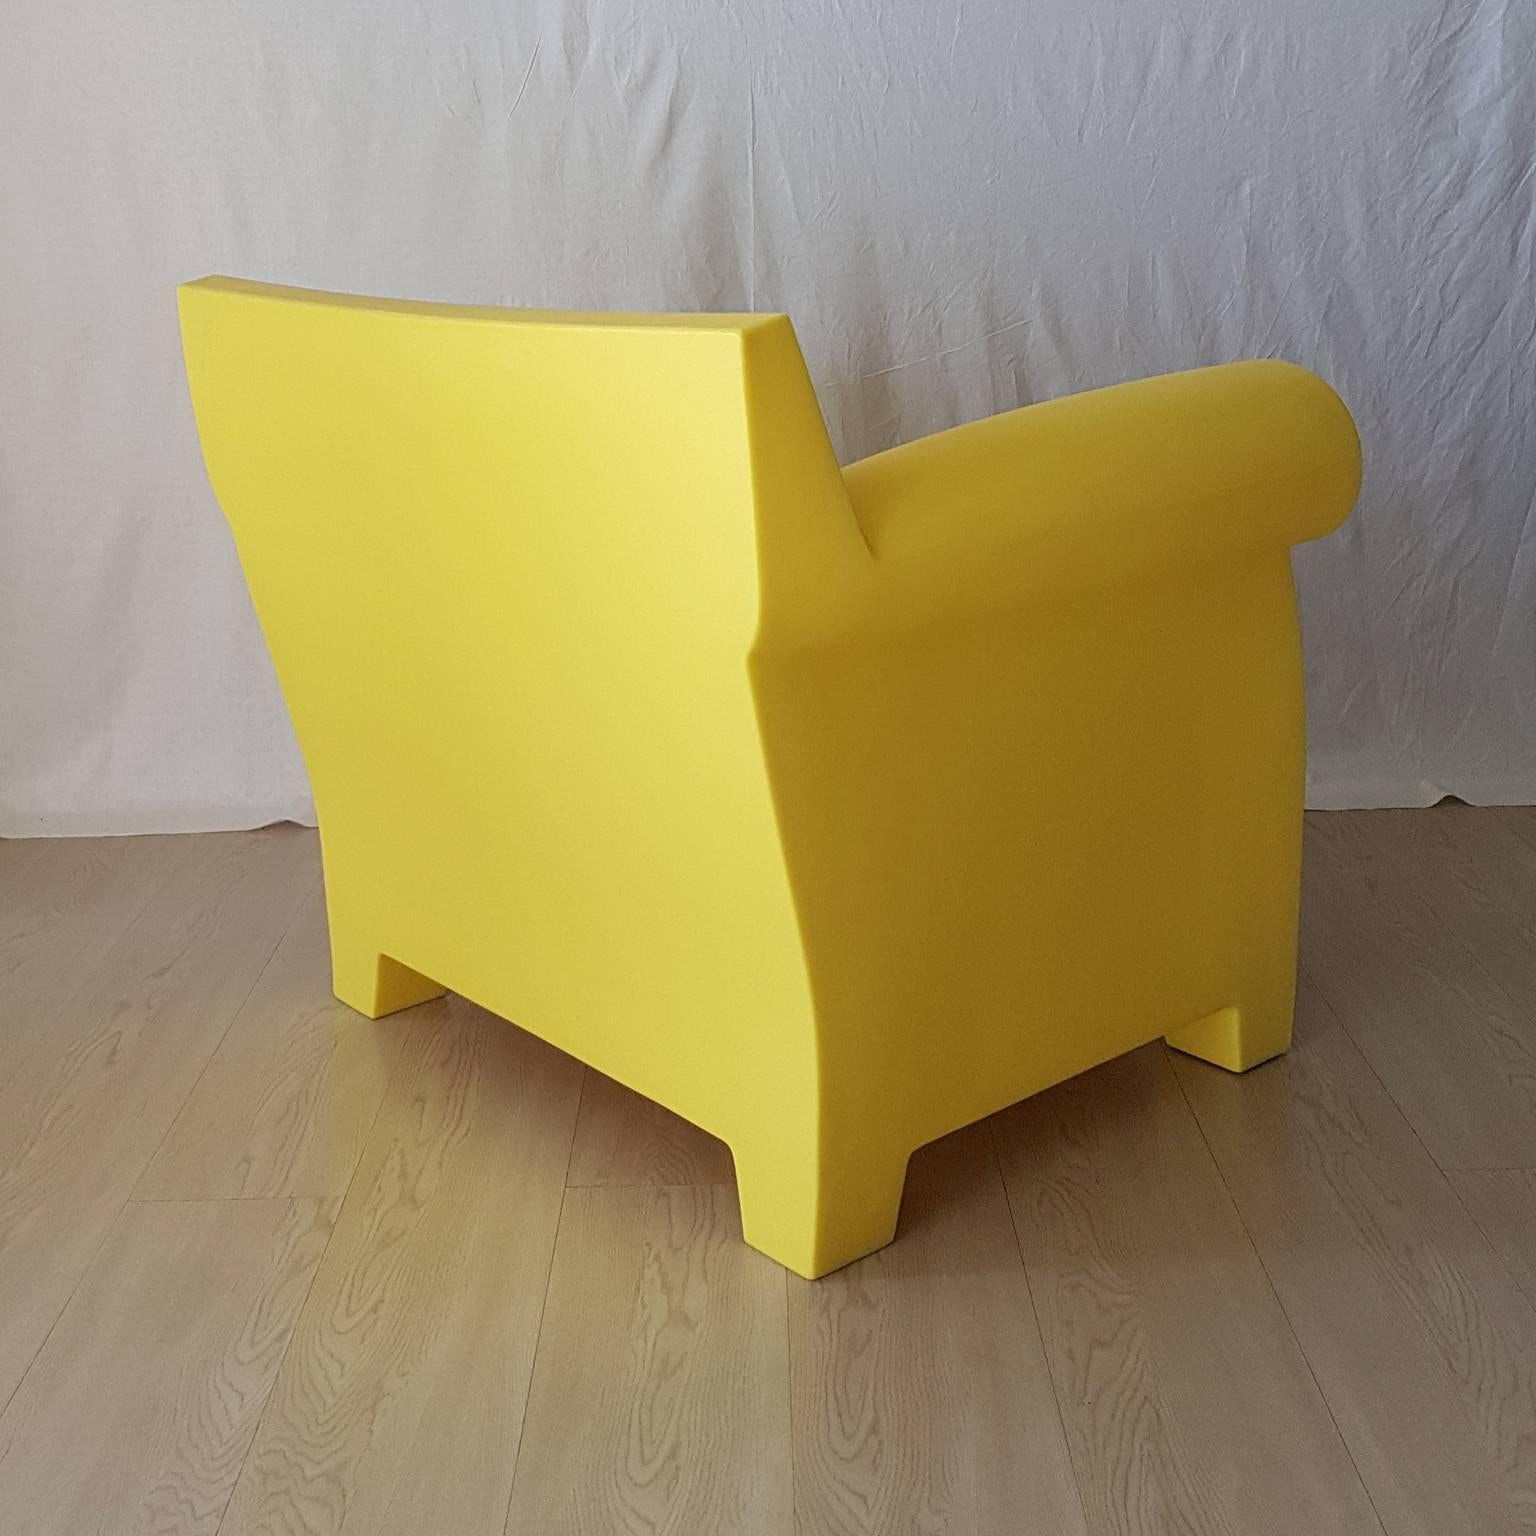 Other Yellow Outdoor Armchair by Philippe Starck / Kartell Compasso d'oro Award, 2001